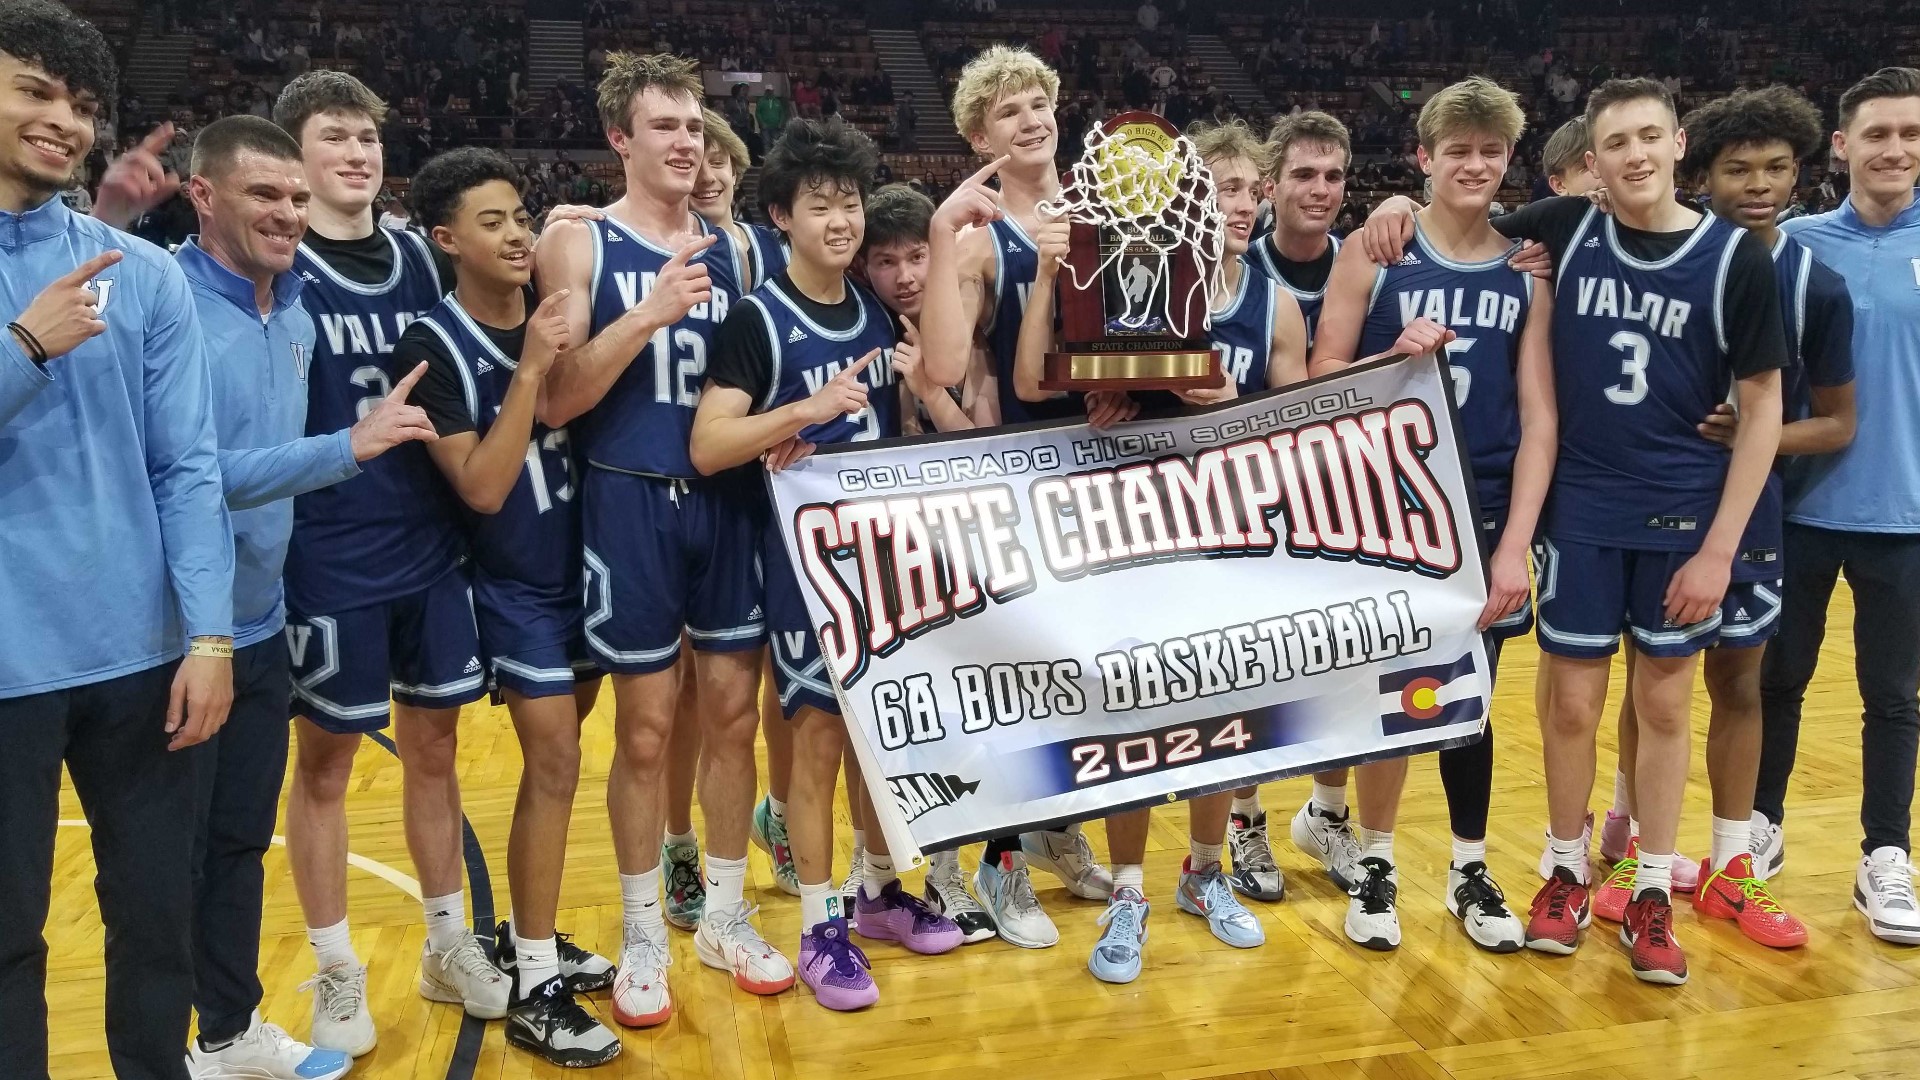 The Eagles defeated the Grizzlies 52-40 in the Class 6A state title game.